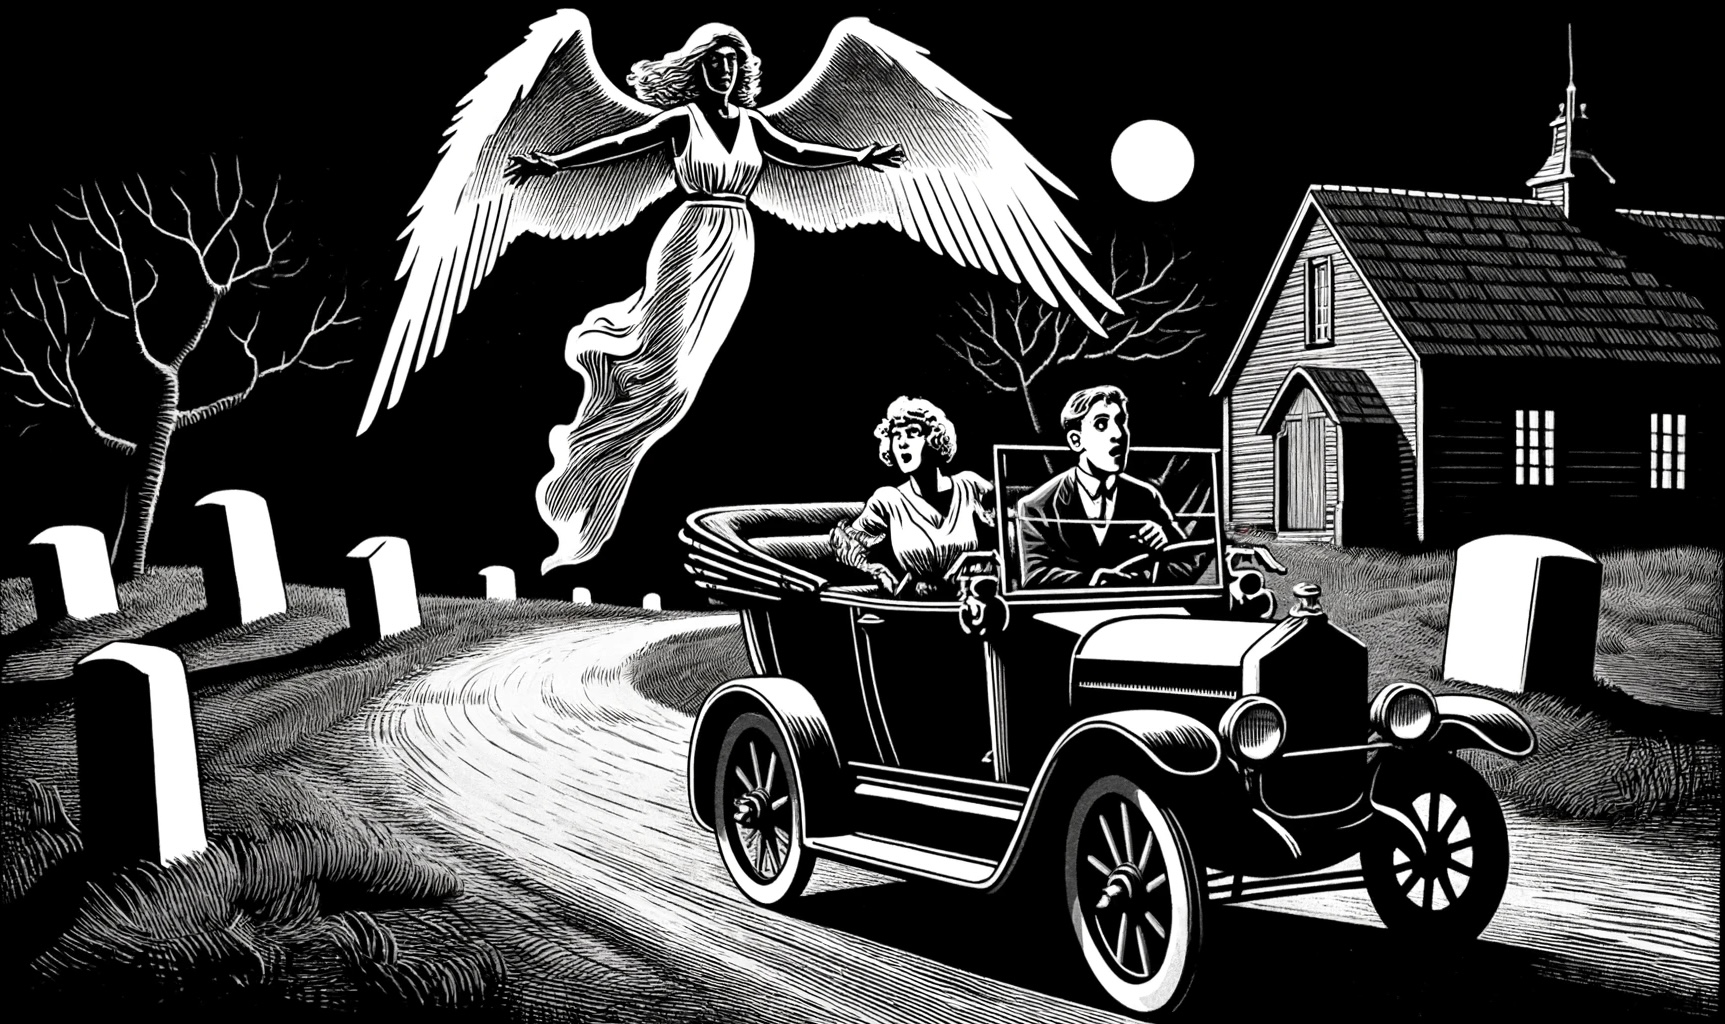 Mr. and Mrs. Voetsch are surprised returning from Buffalo in their motor car by an apparition. (AI)